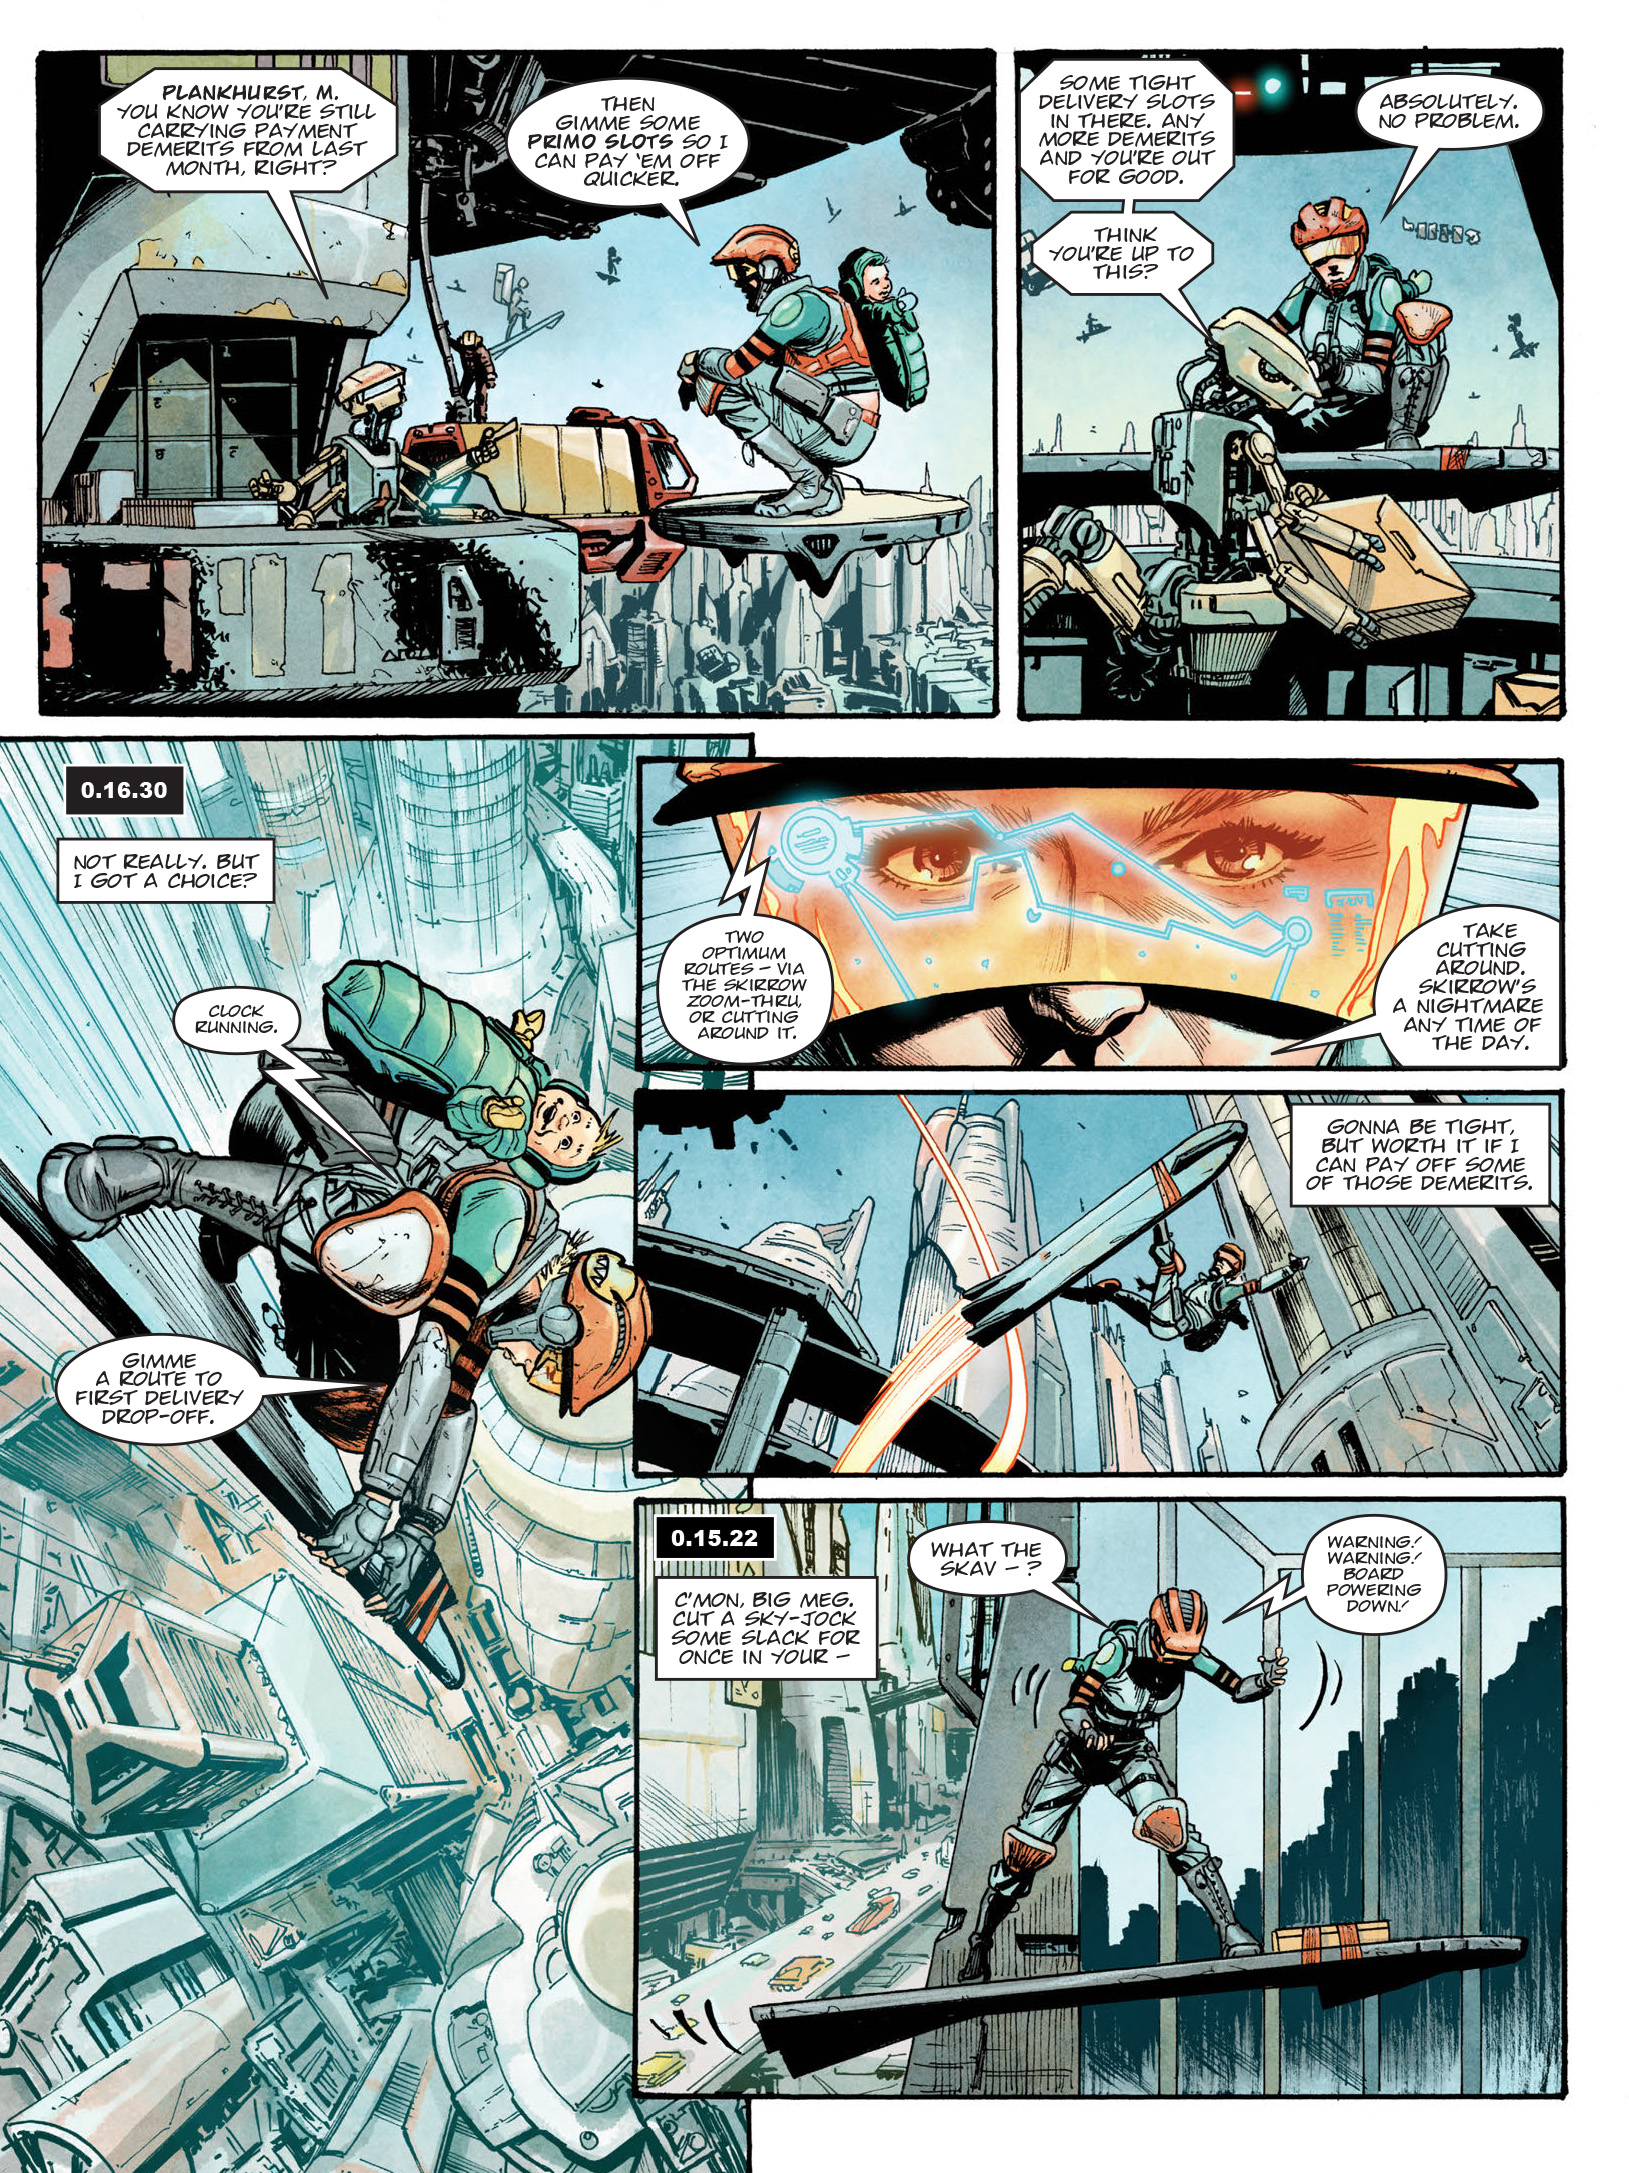 2000 AD: Chapter 2219 - Page 4